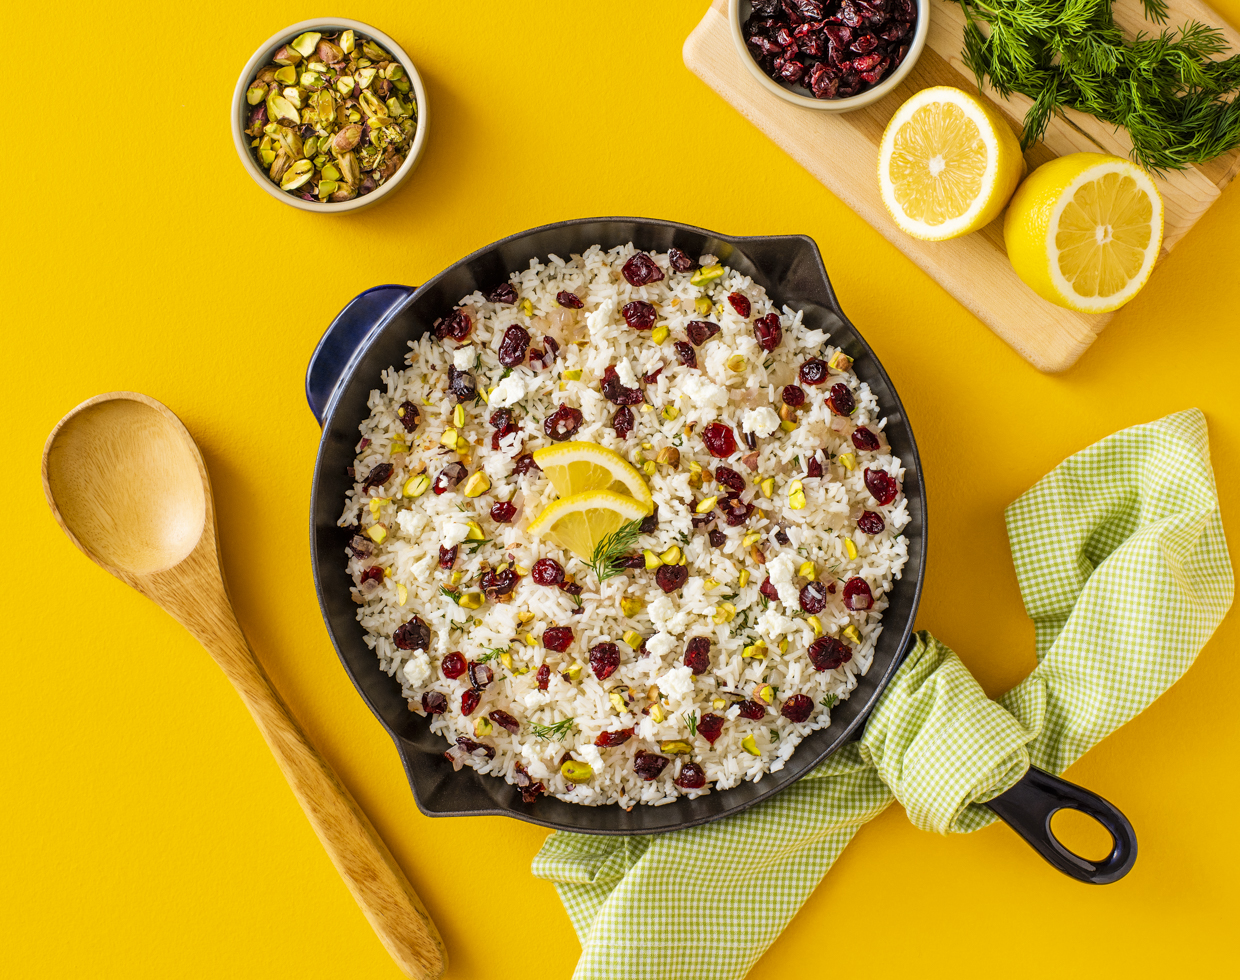 Lemon Dill Basmati with Cranberries, Pistachios and Goat Cheese